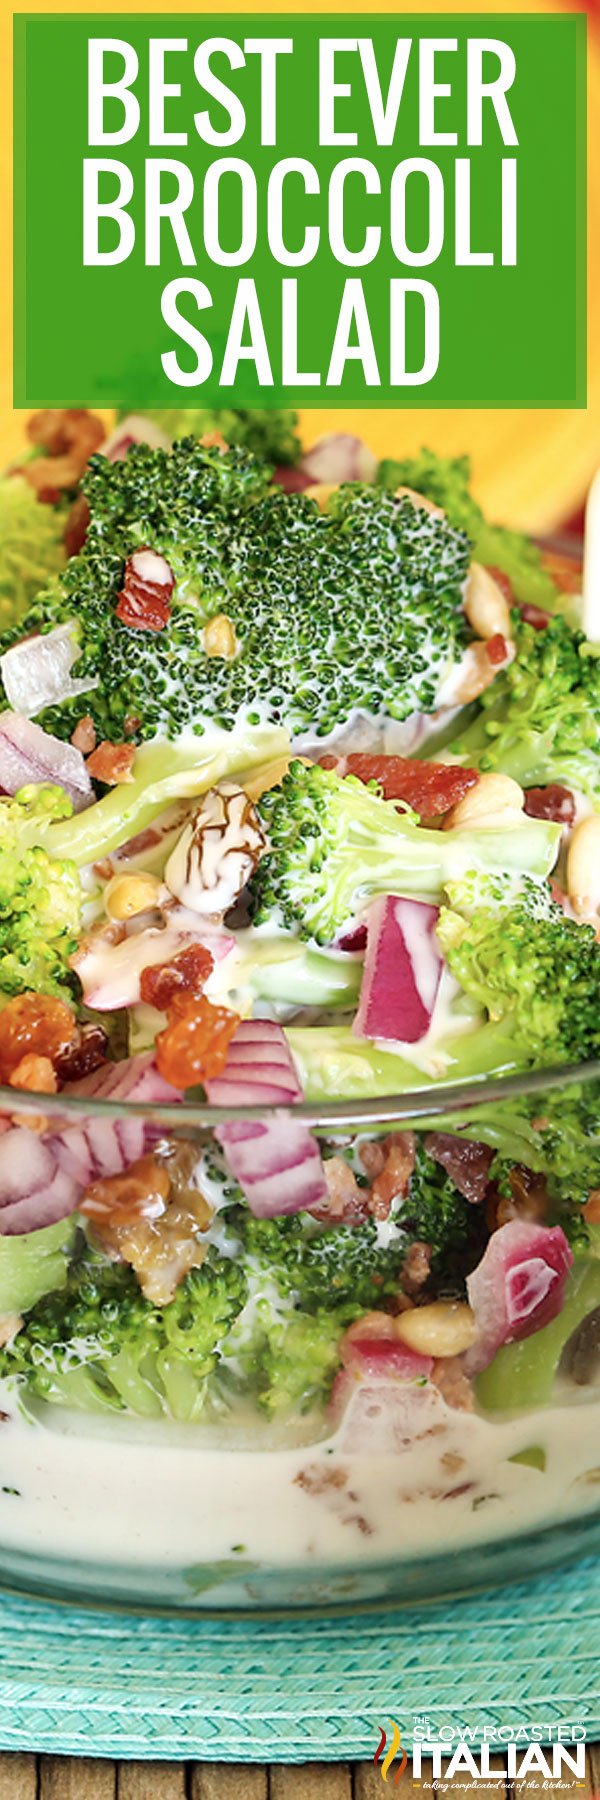 titled image collage for broccoli salad